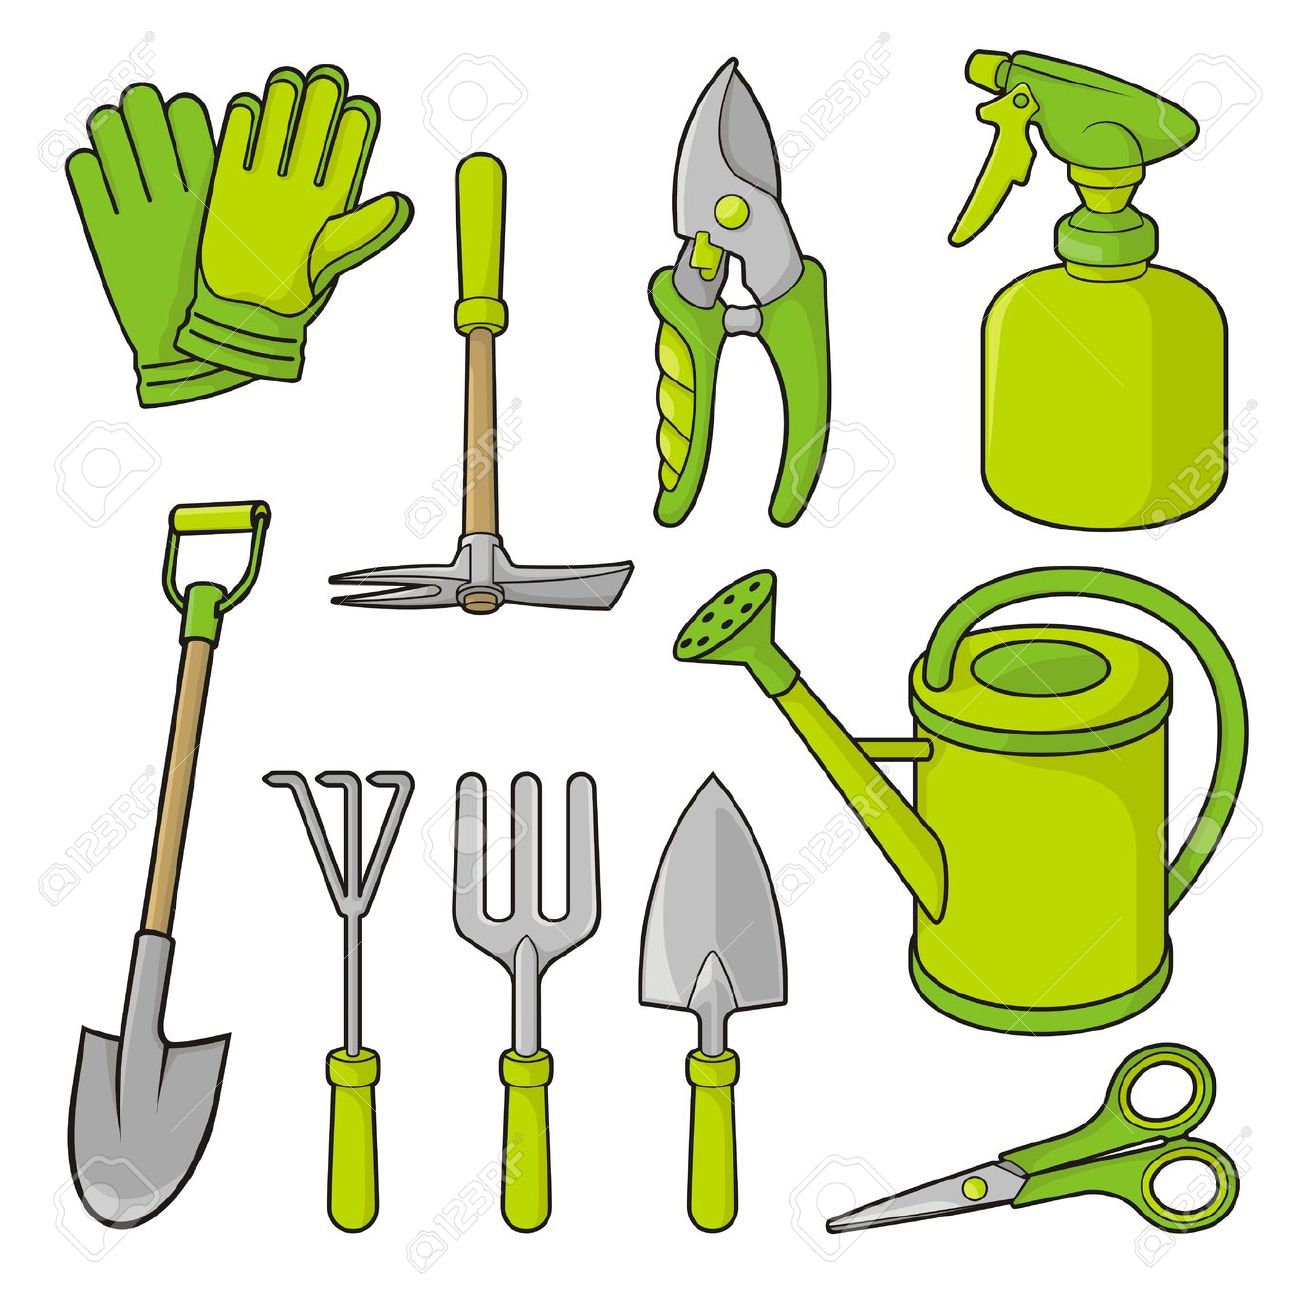 clipart pictures of gardening tools - photo #1